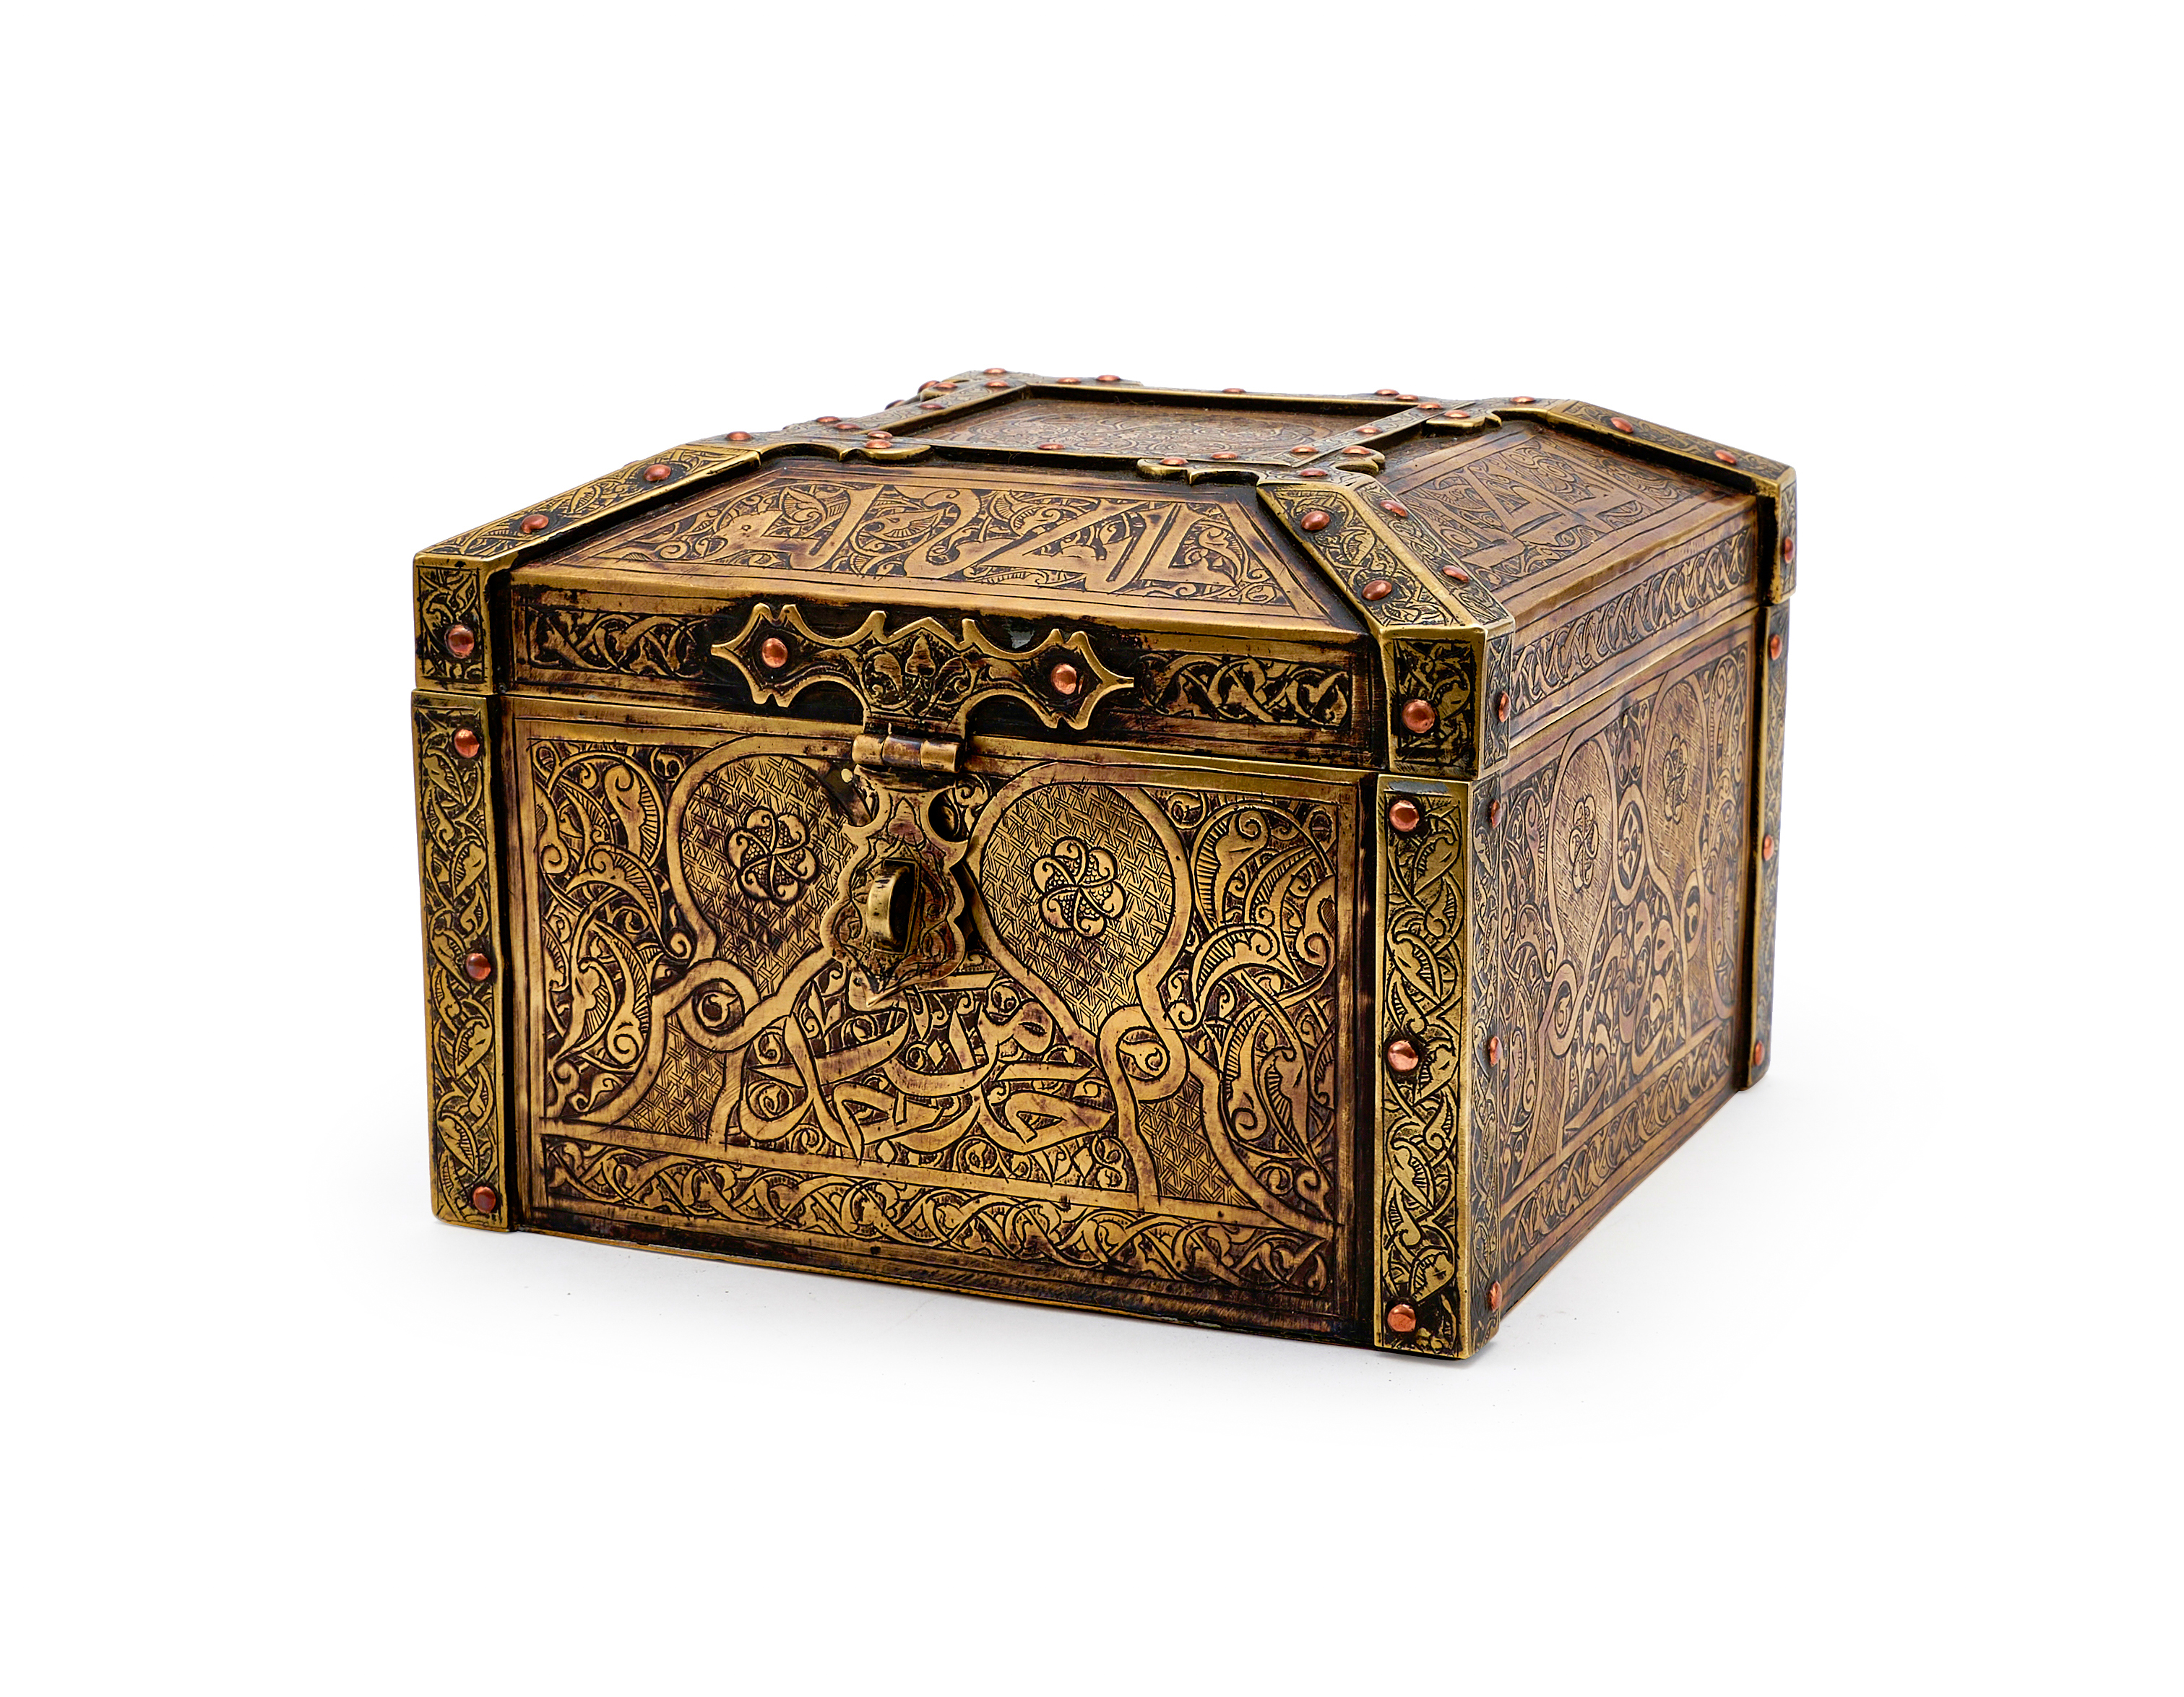 A MIX METAL ISLAMIC CASKET. 20TH CENTURY, SYRIA OR OTTOMAN - Image 2 of 5